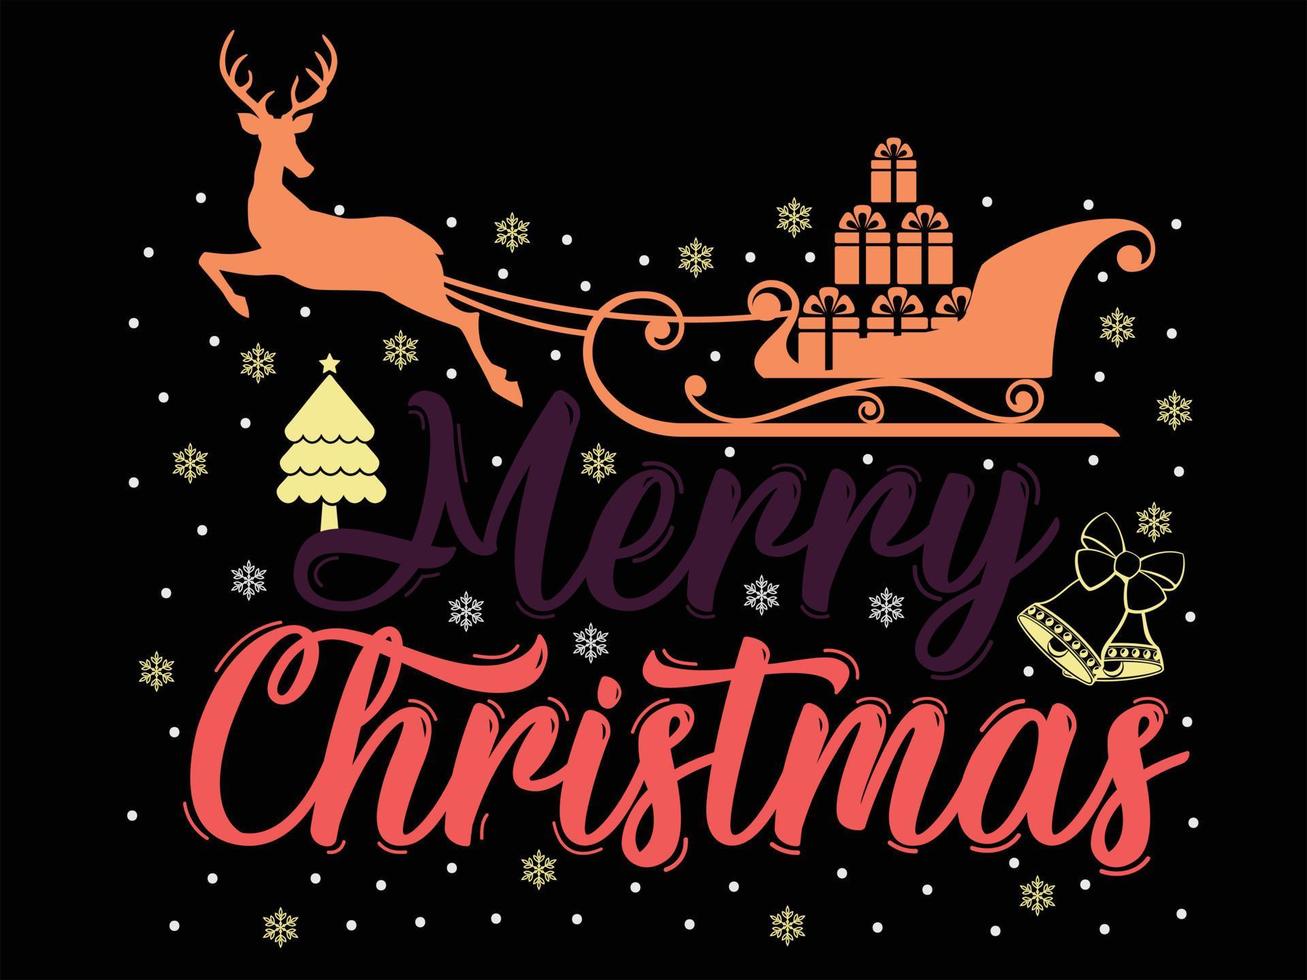 Merry Christmas 03 Merry Christmas and Happy Holidays Typography set vector